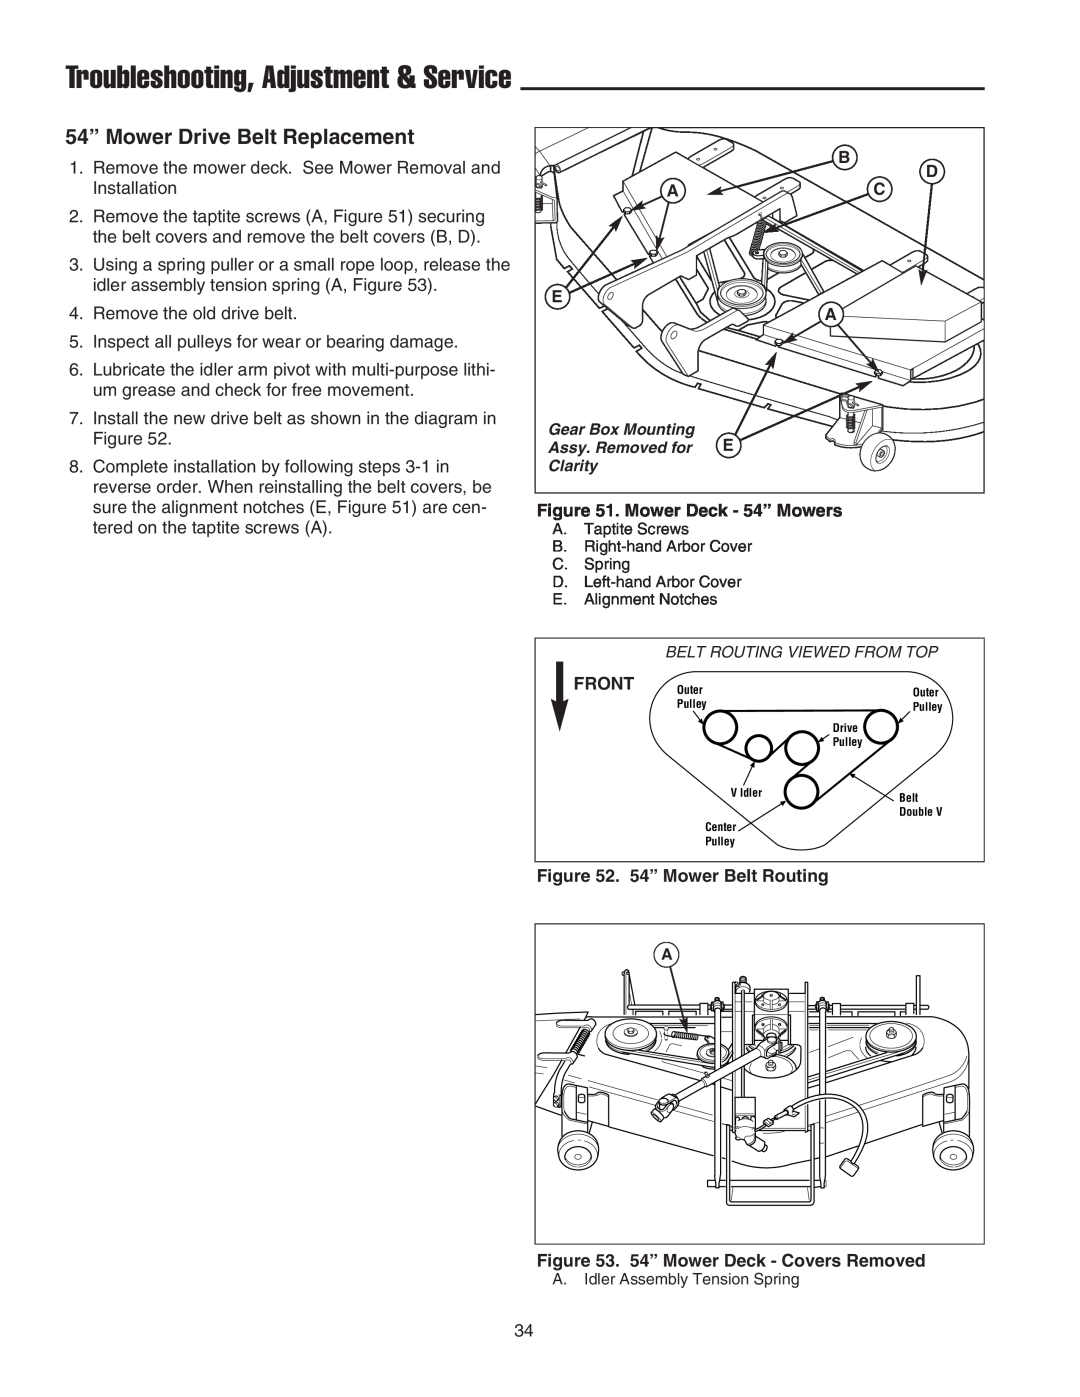 Simplicity 1693138 54” Mower Drive Belt Replacement, Troubleshooting, Adjustment & Service, Mower Deck - 54” Mowers, Front 